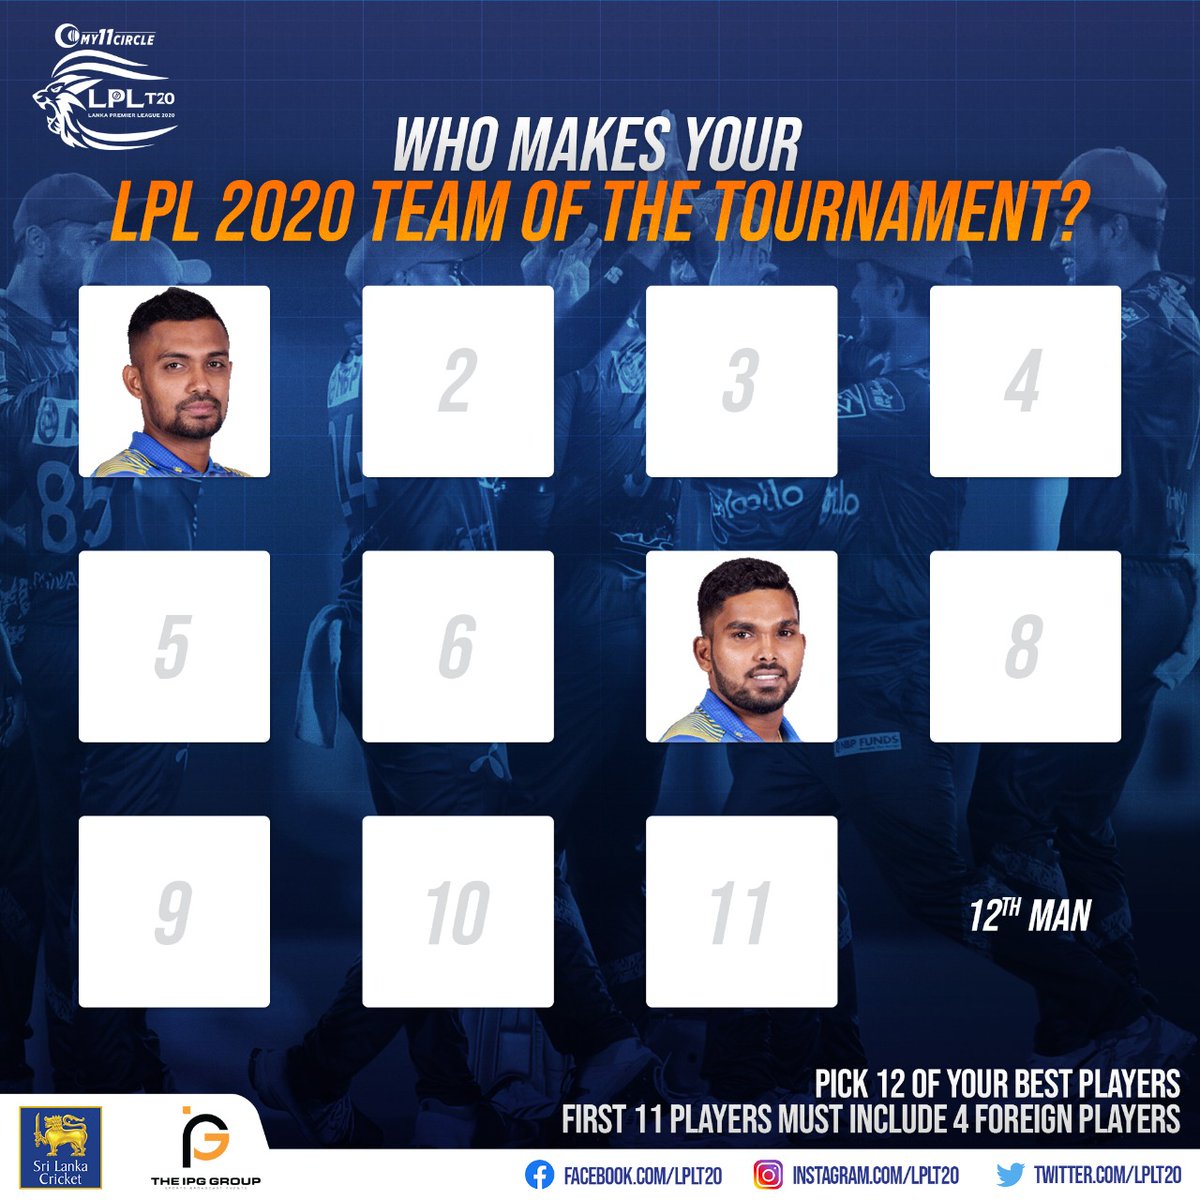 Who would make it in your team for the LPL 2020 tournament? Pick your favorites, pick your best! 🤩

#LPL2020 #එක්වජයගමූ #wintogether #ஒன்றாகவெல்வோம்